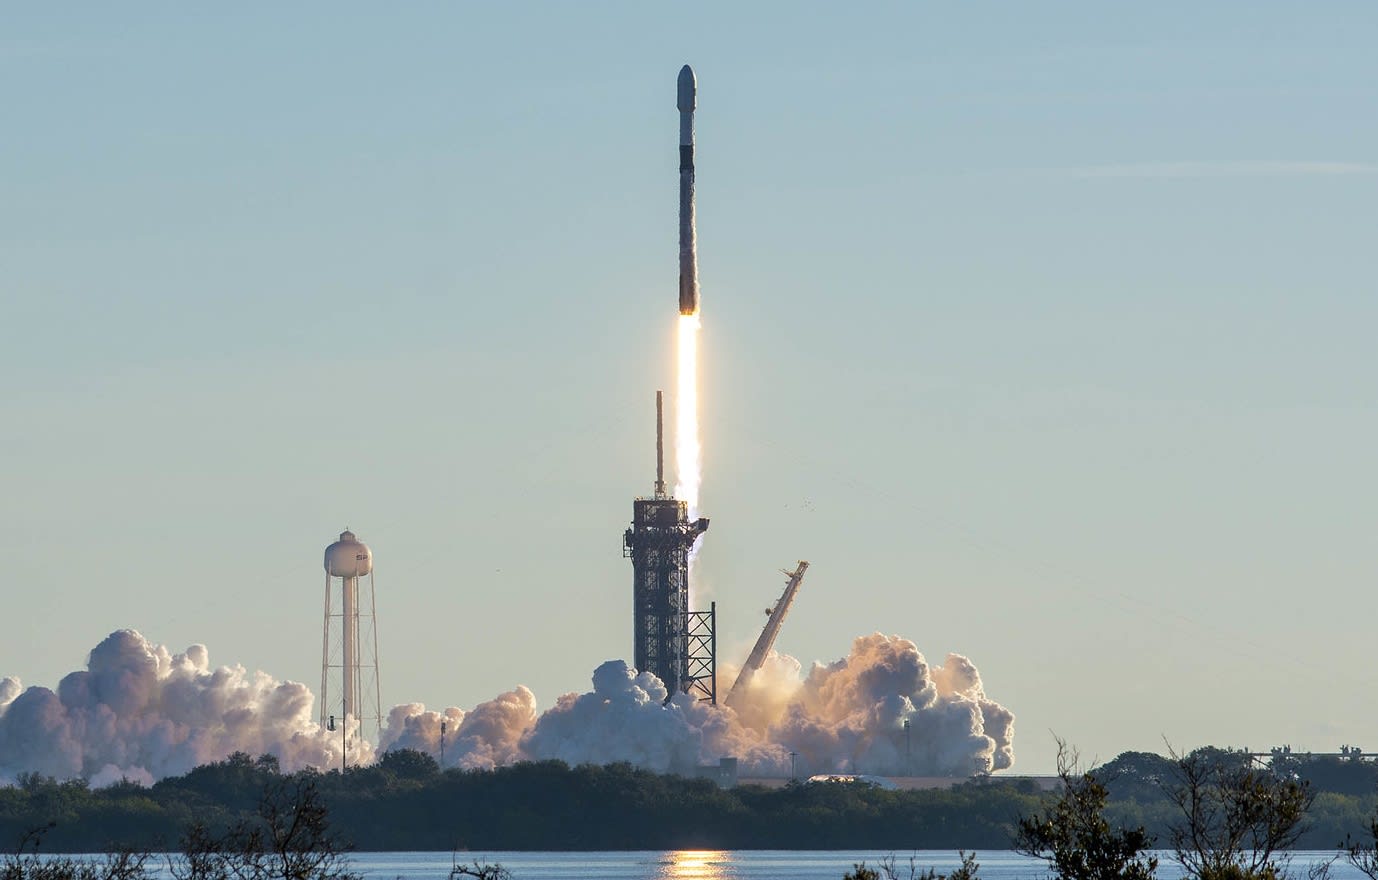 $ 1.9 billion invested, led by SpaceX